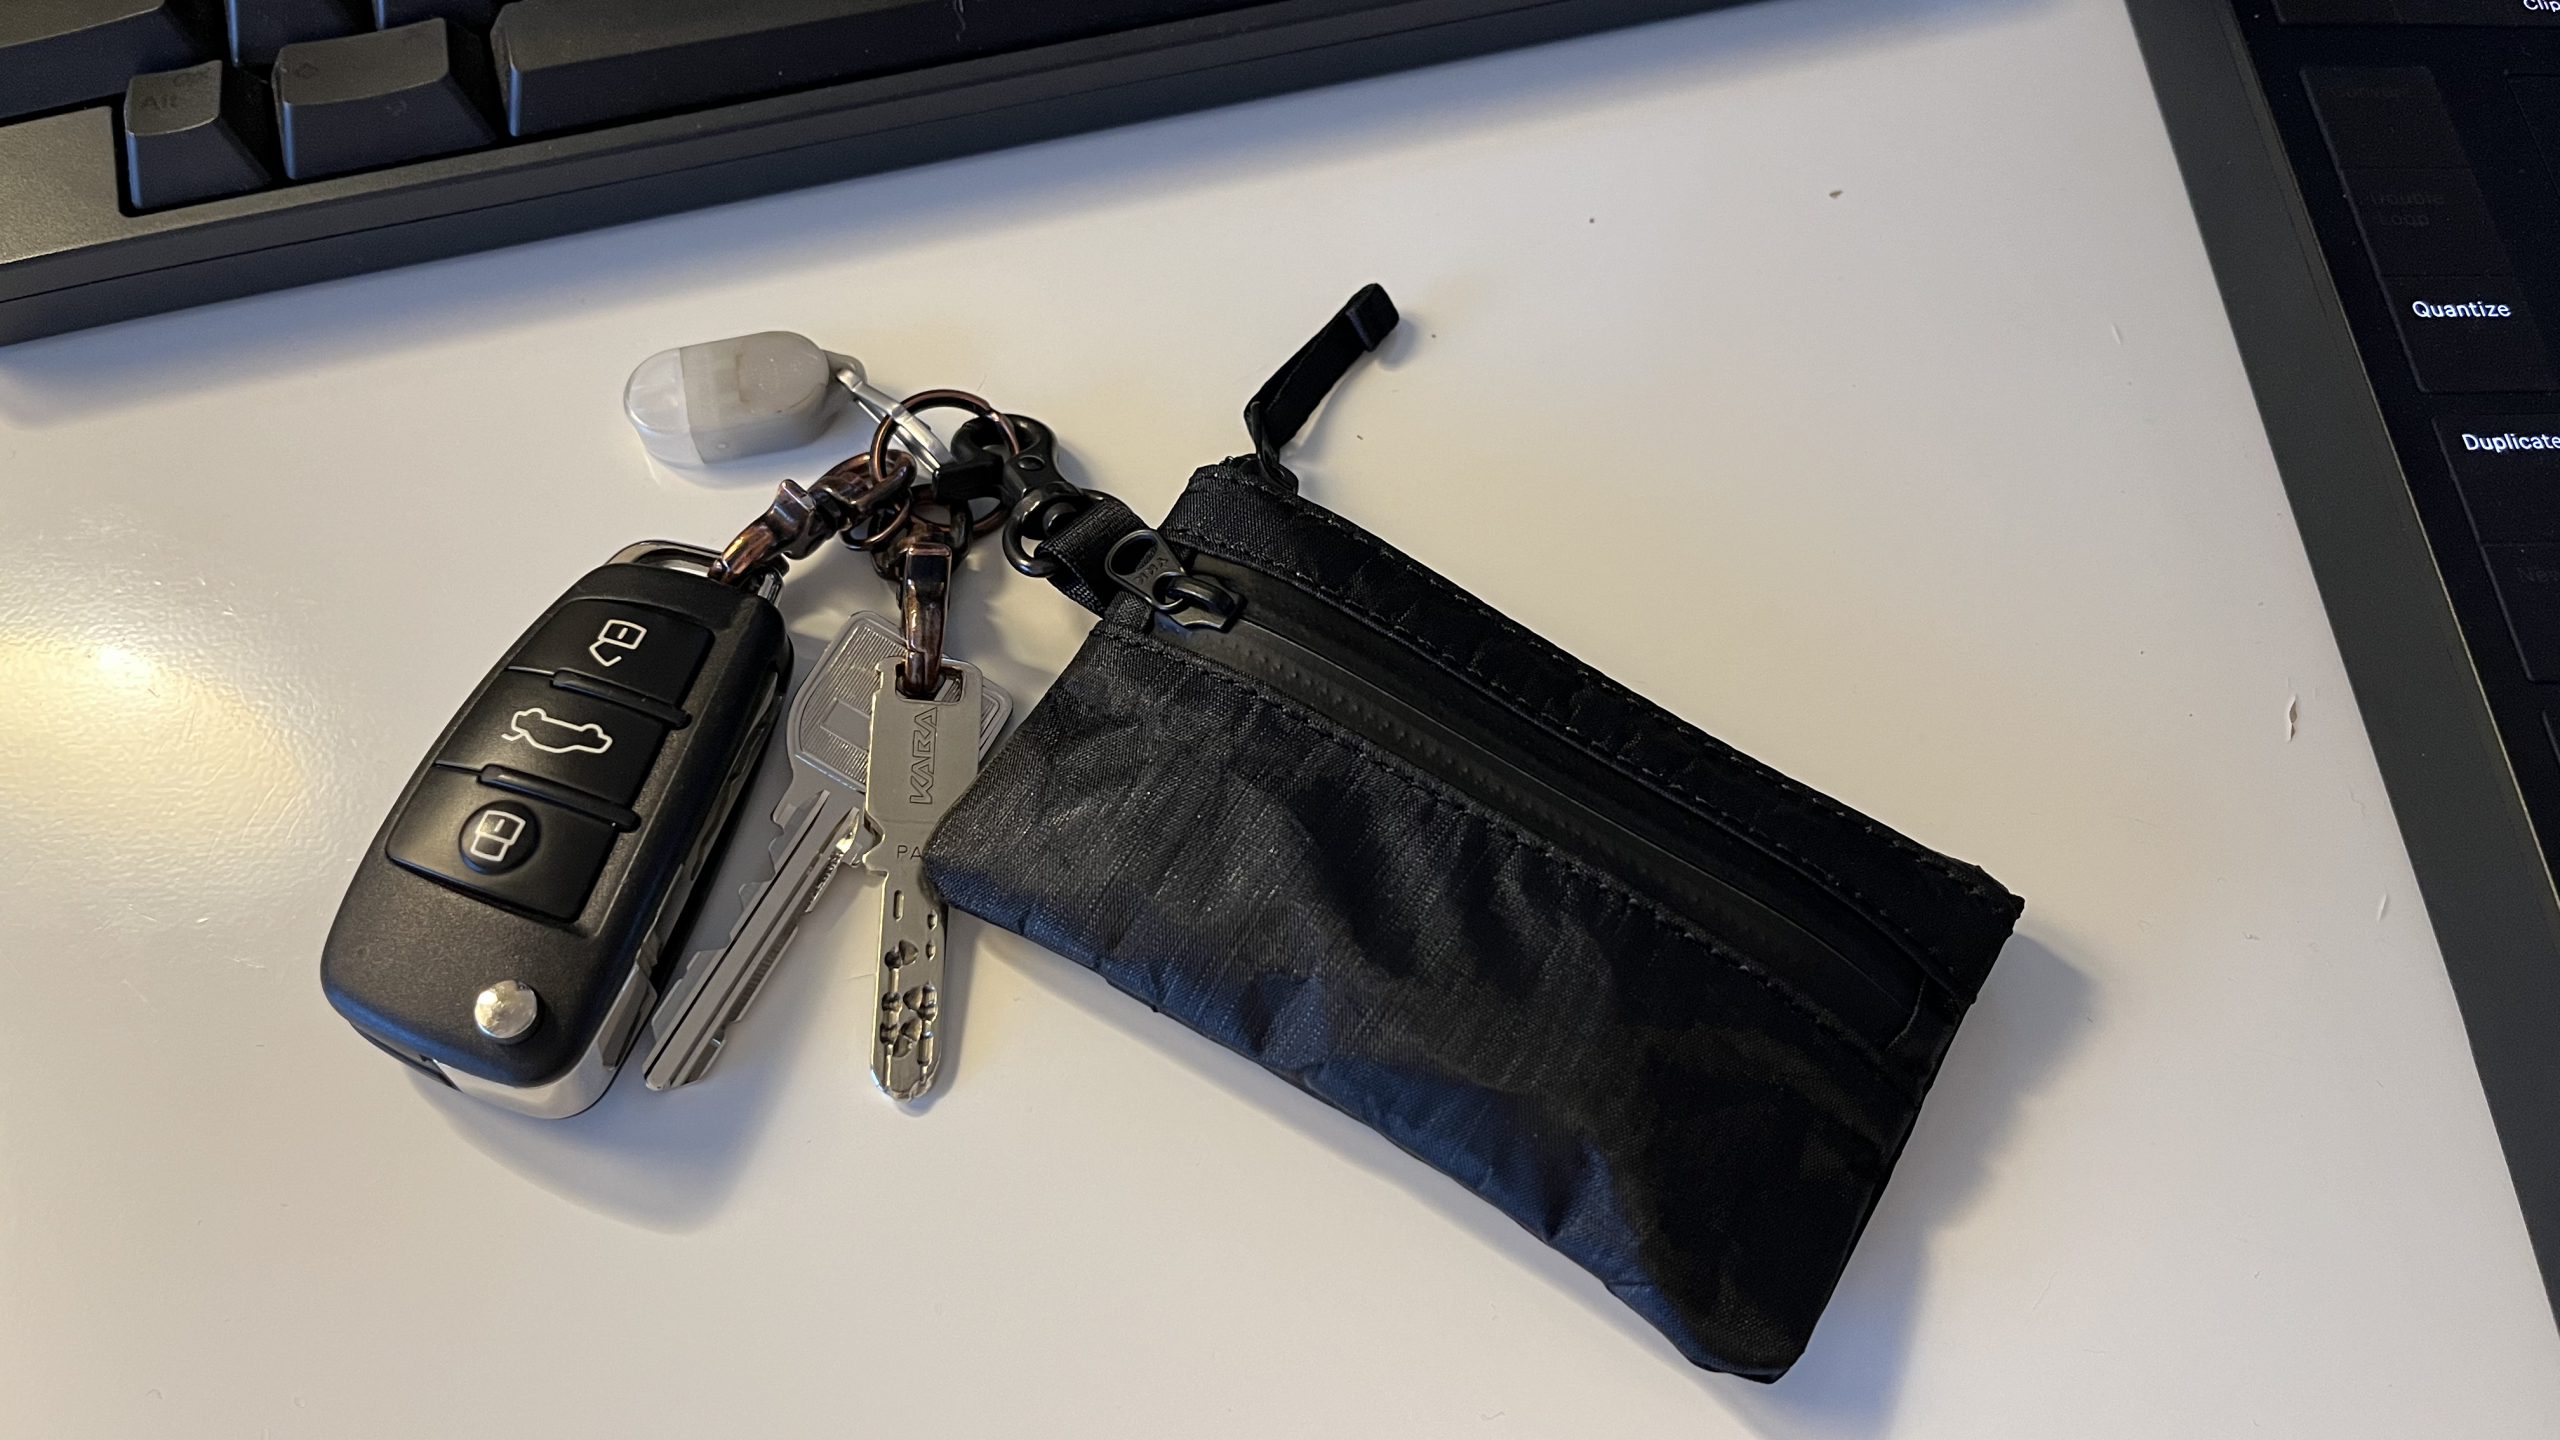 NEXTRAVELER TOOLS DAILY COIN AND CARD HOLDER 1.2 を購入してみた